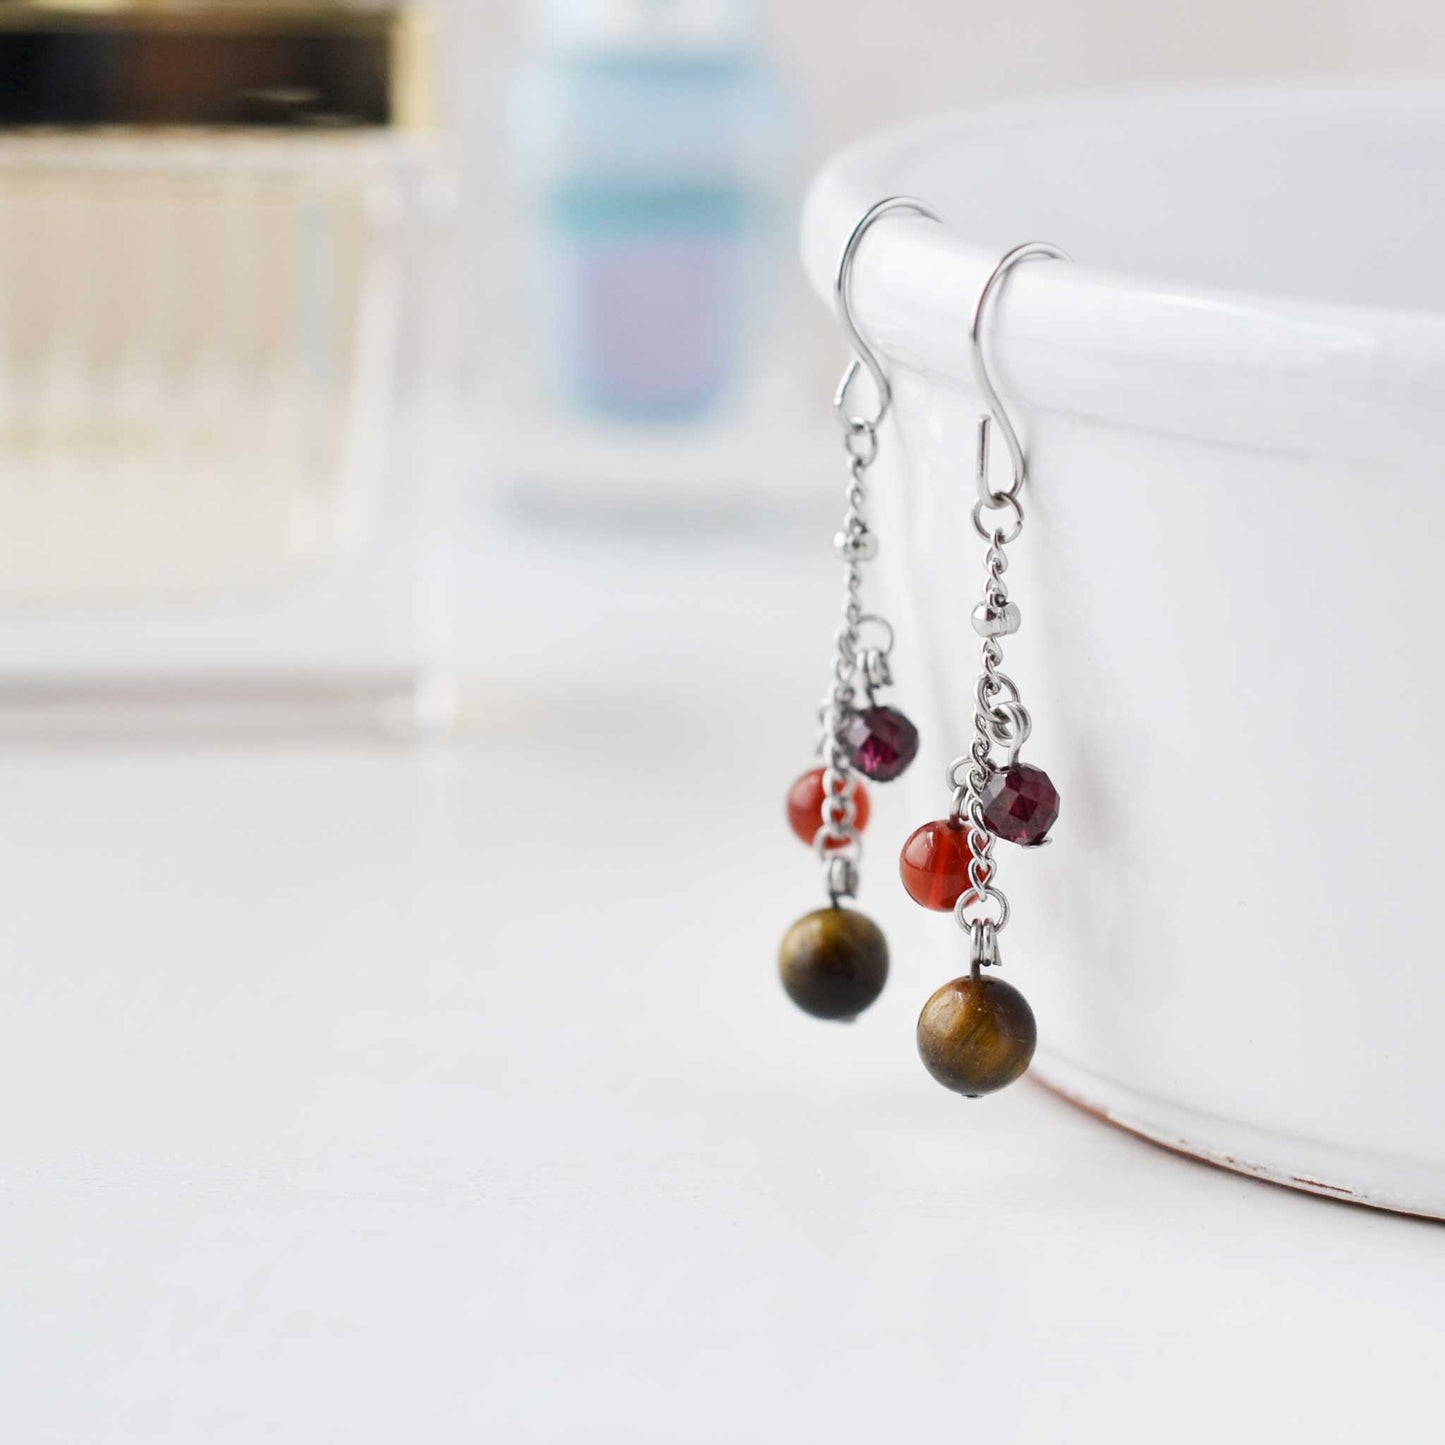 Dark coloured gemstone bead drop earrings hanging on white cup against soft focus background